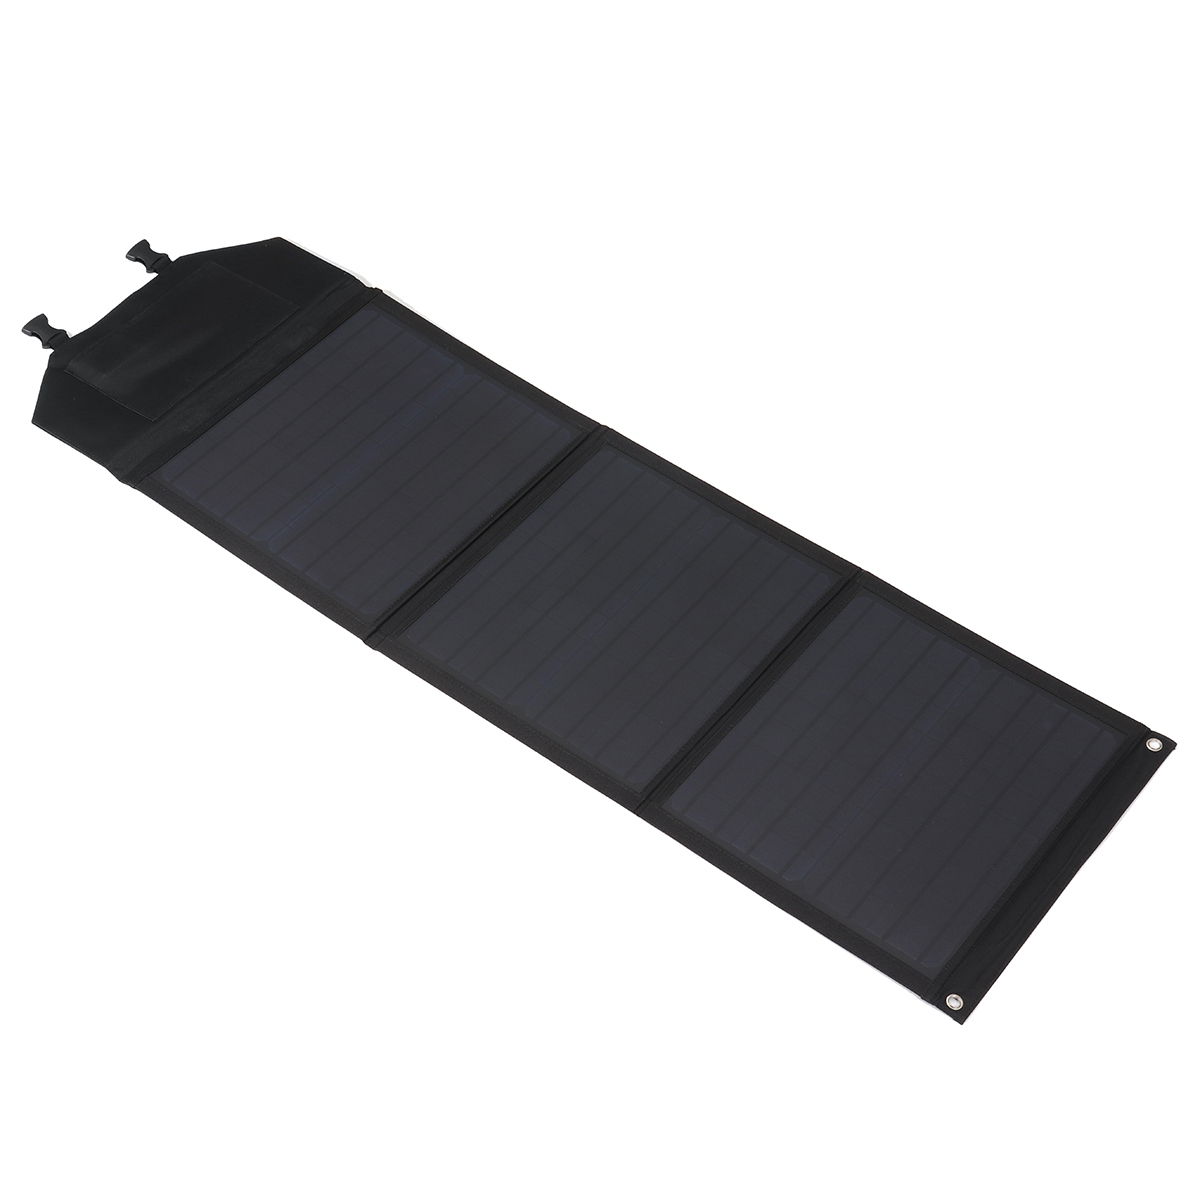 60W-USB-Solar-Panel-Folding-Monocrystalline-PET-Power-Charger--for-Phone-RV-Car-MP3-PAD-Charger-Outd-1905385-11